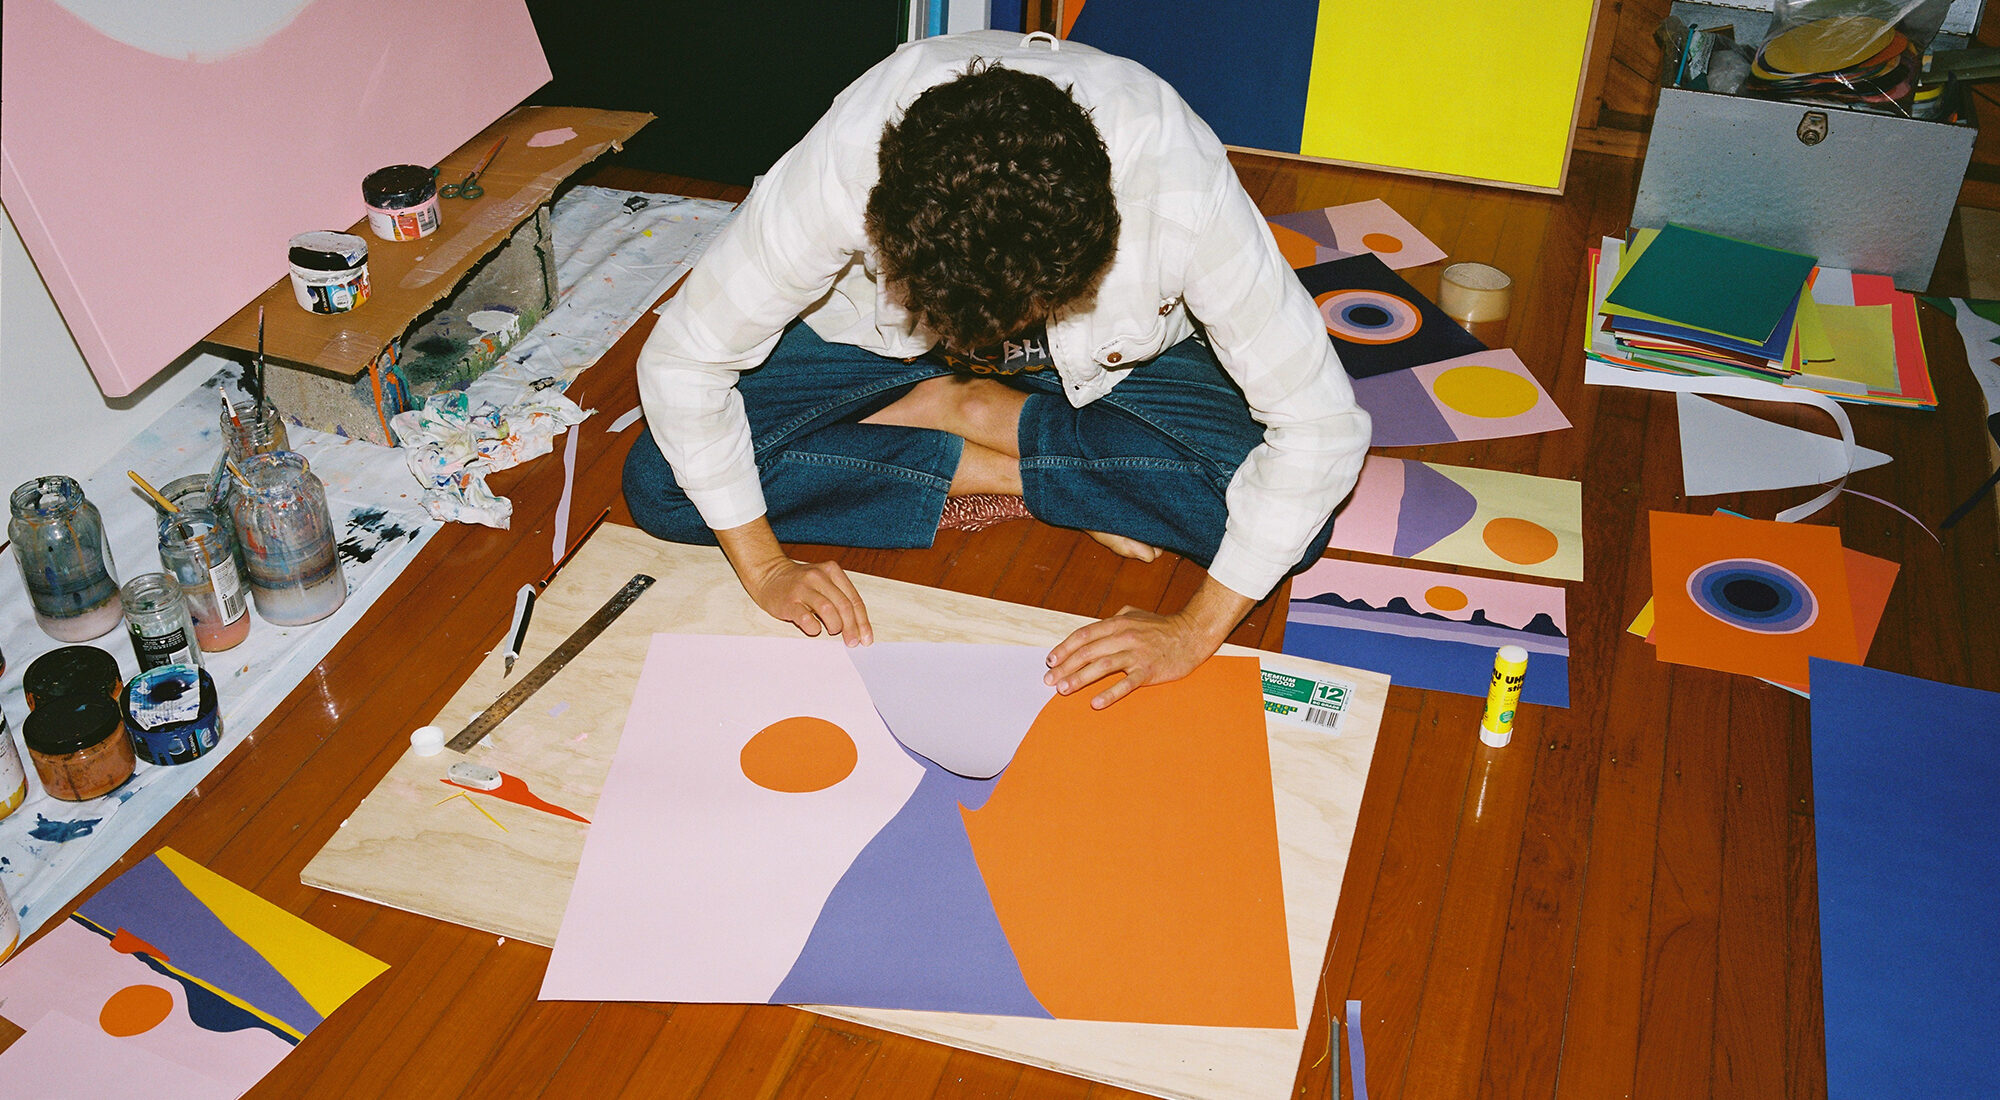 An artist working with paper on the ground.